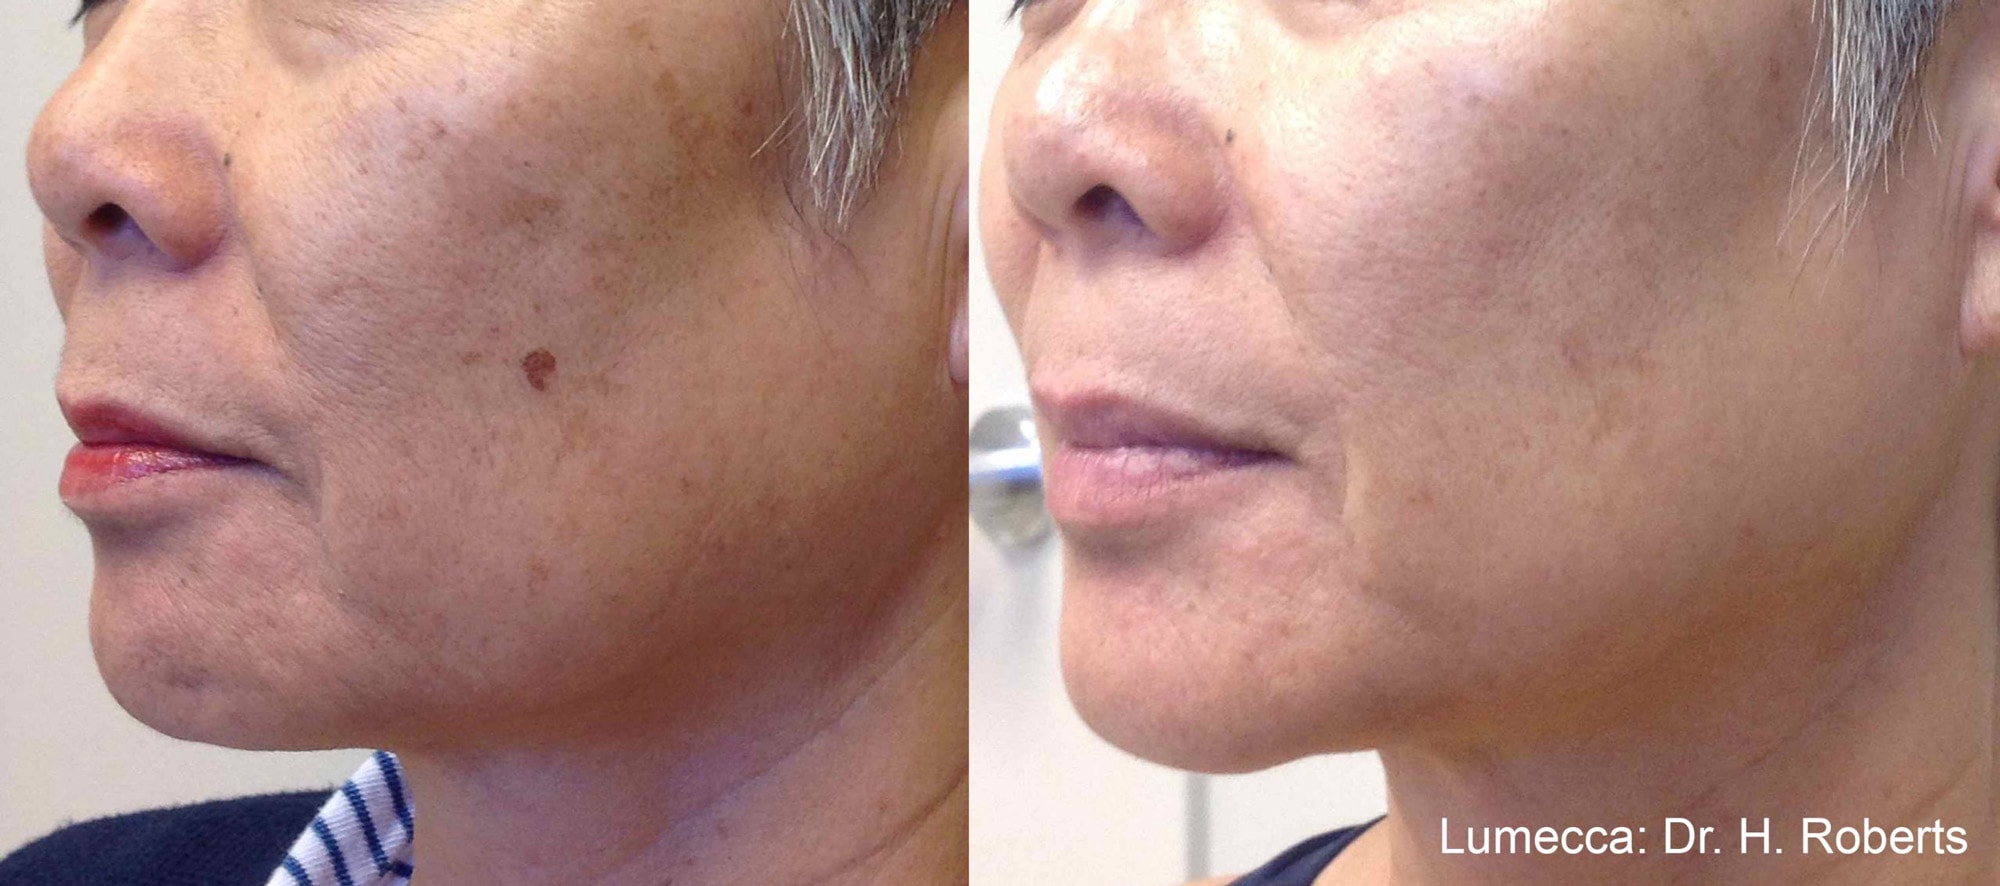 Before and After photos showing Lumecca treatments improving texture and reducing pigmentation spots on a woman’s cheeks